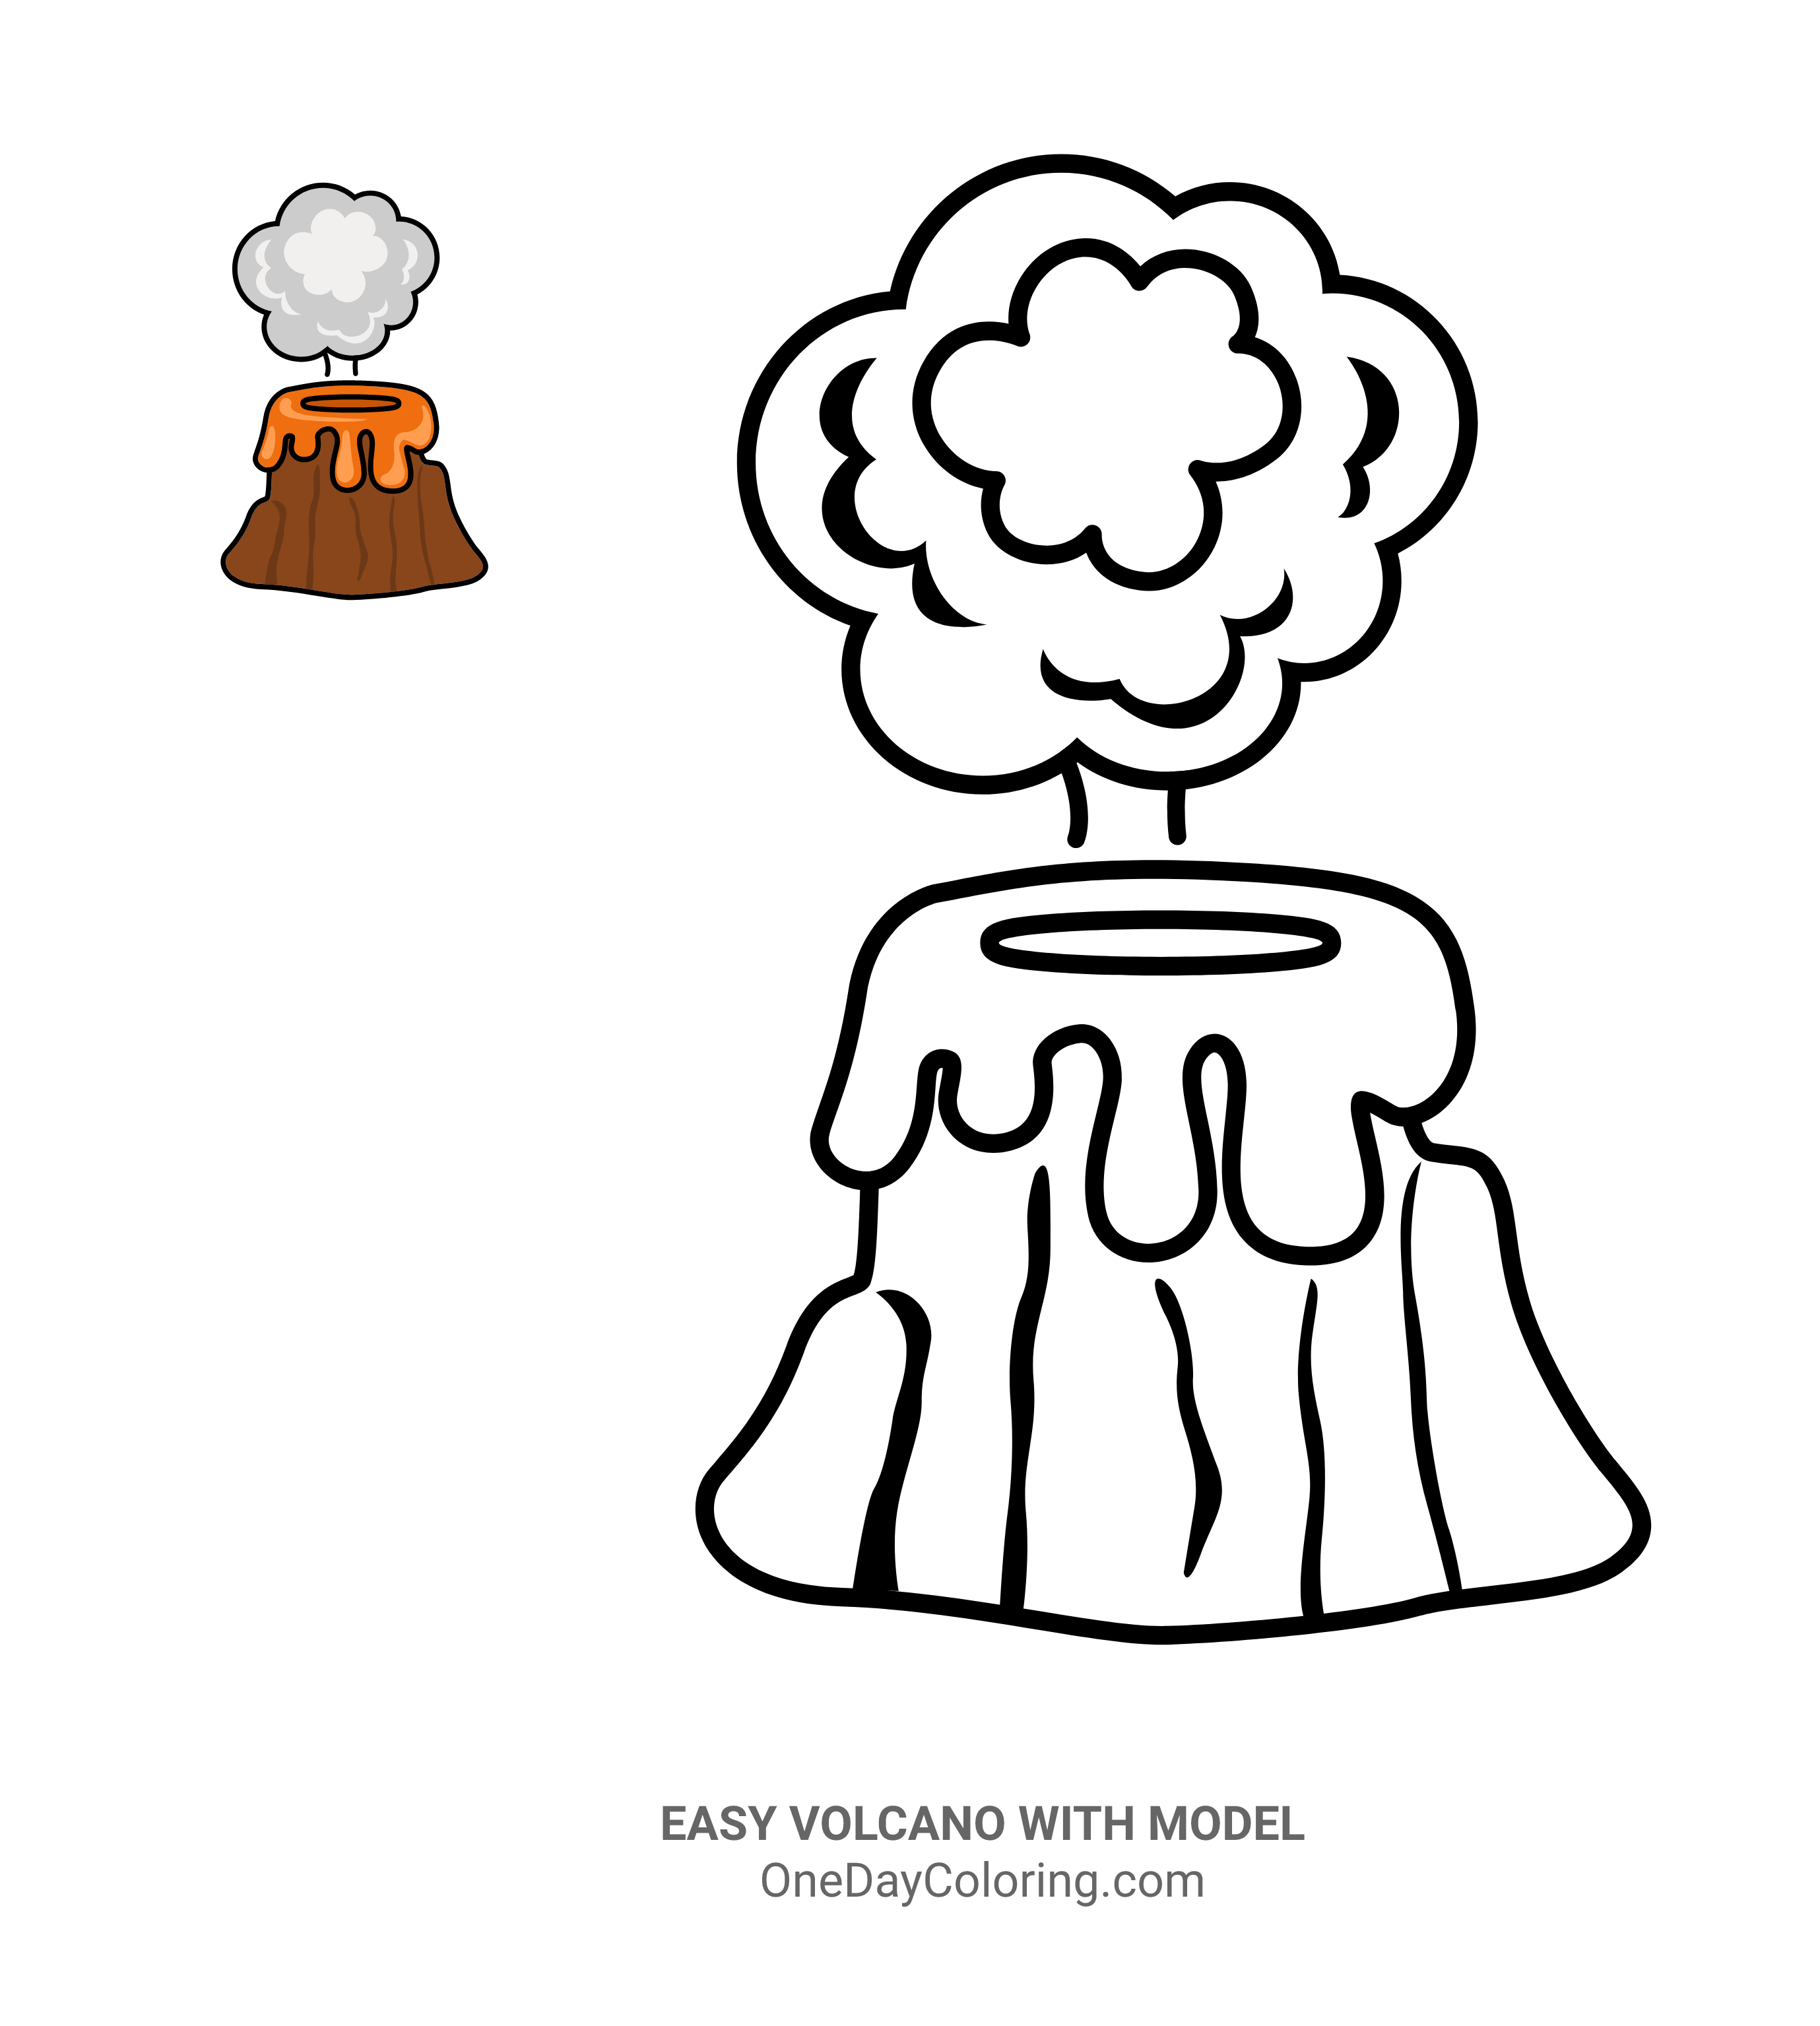 super easy volcano with model